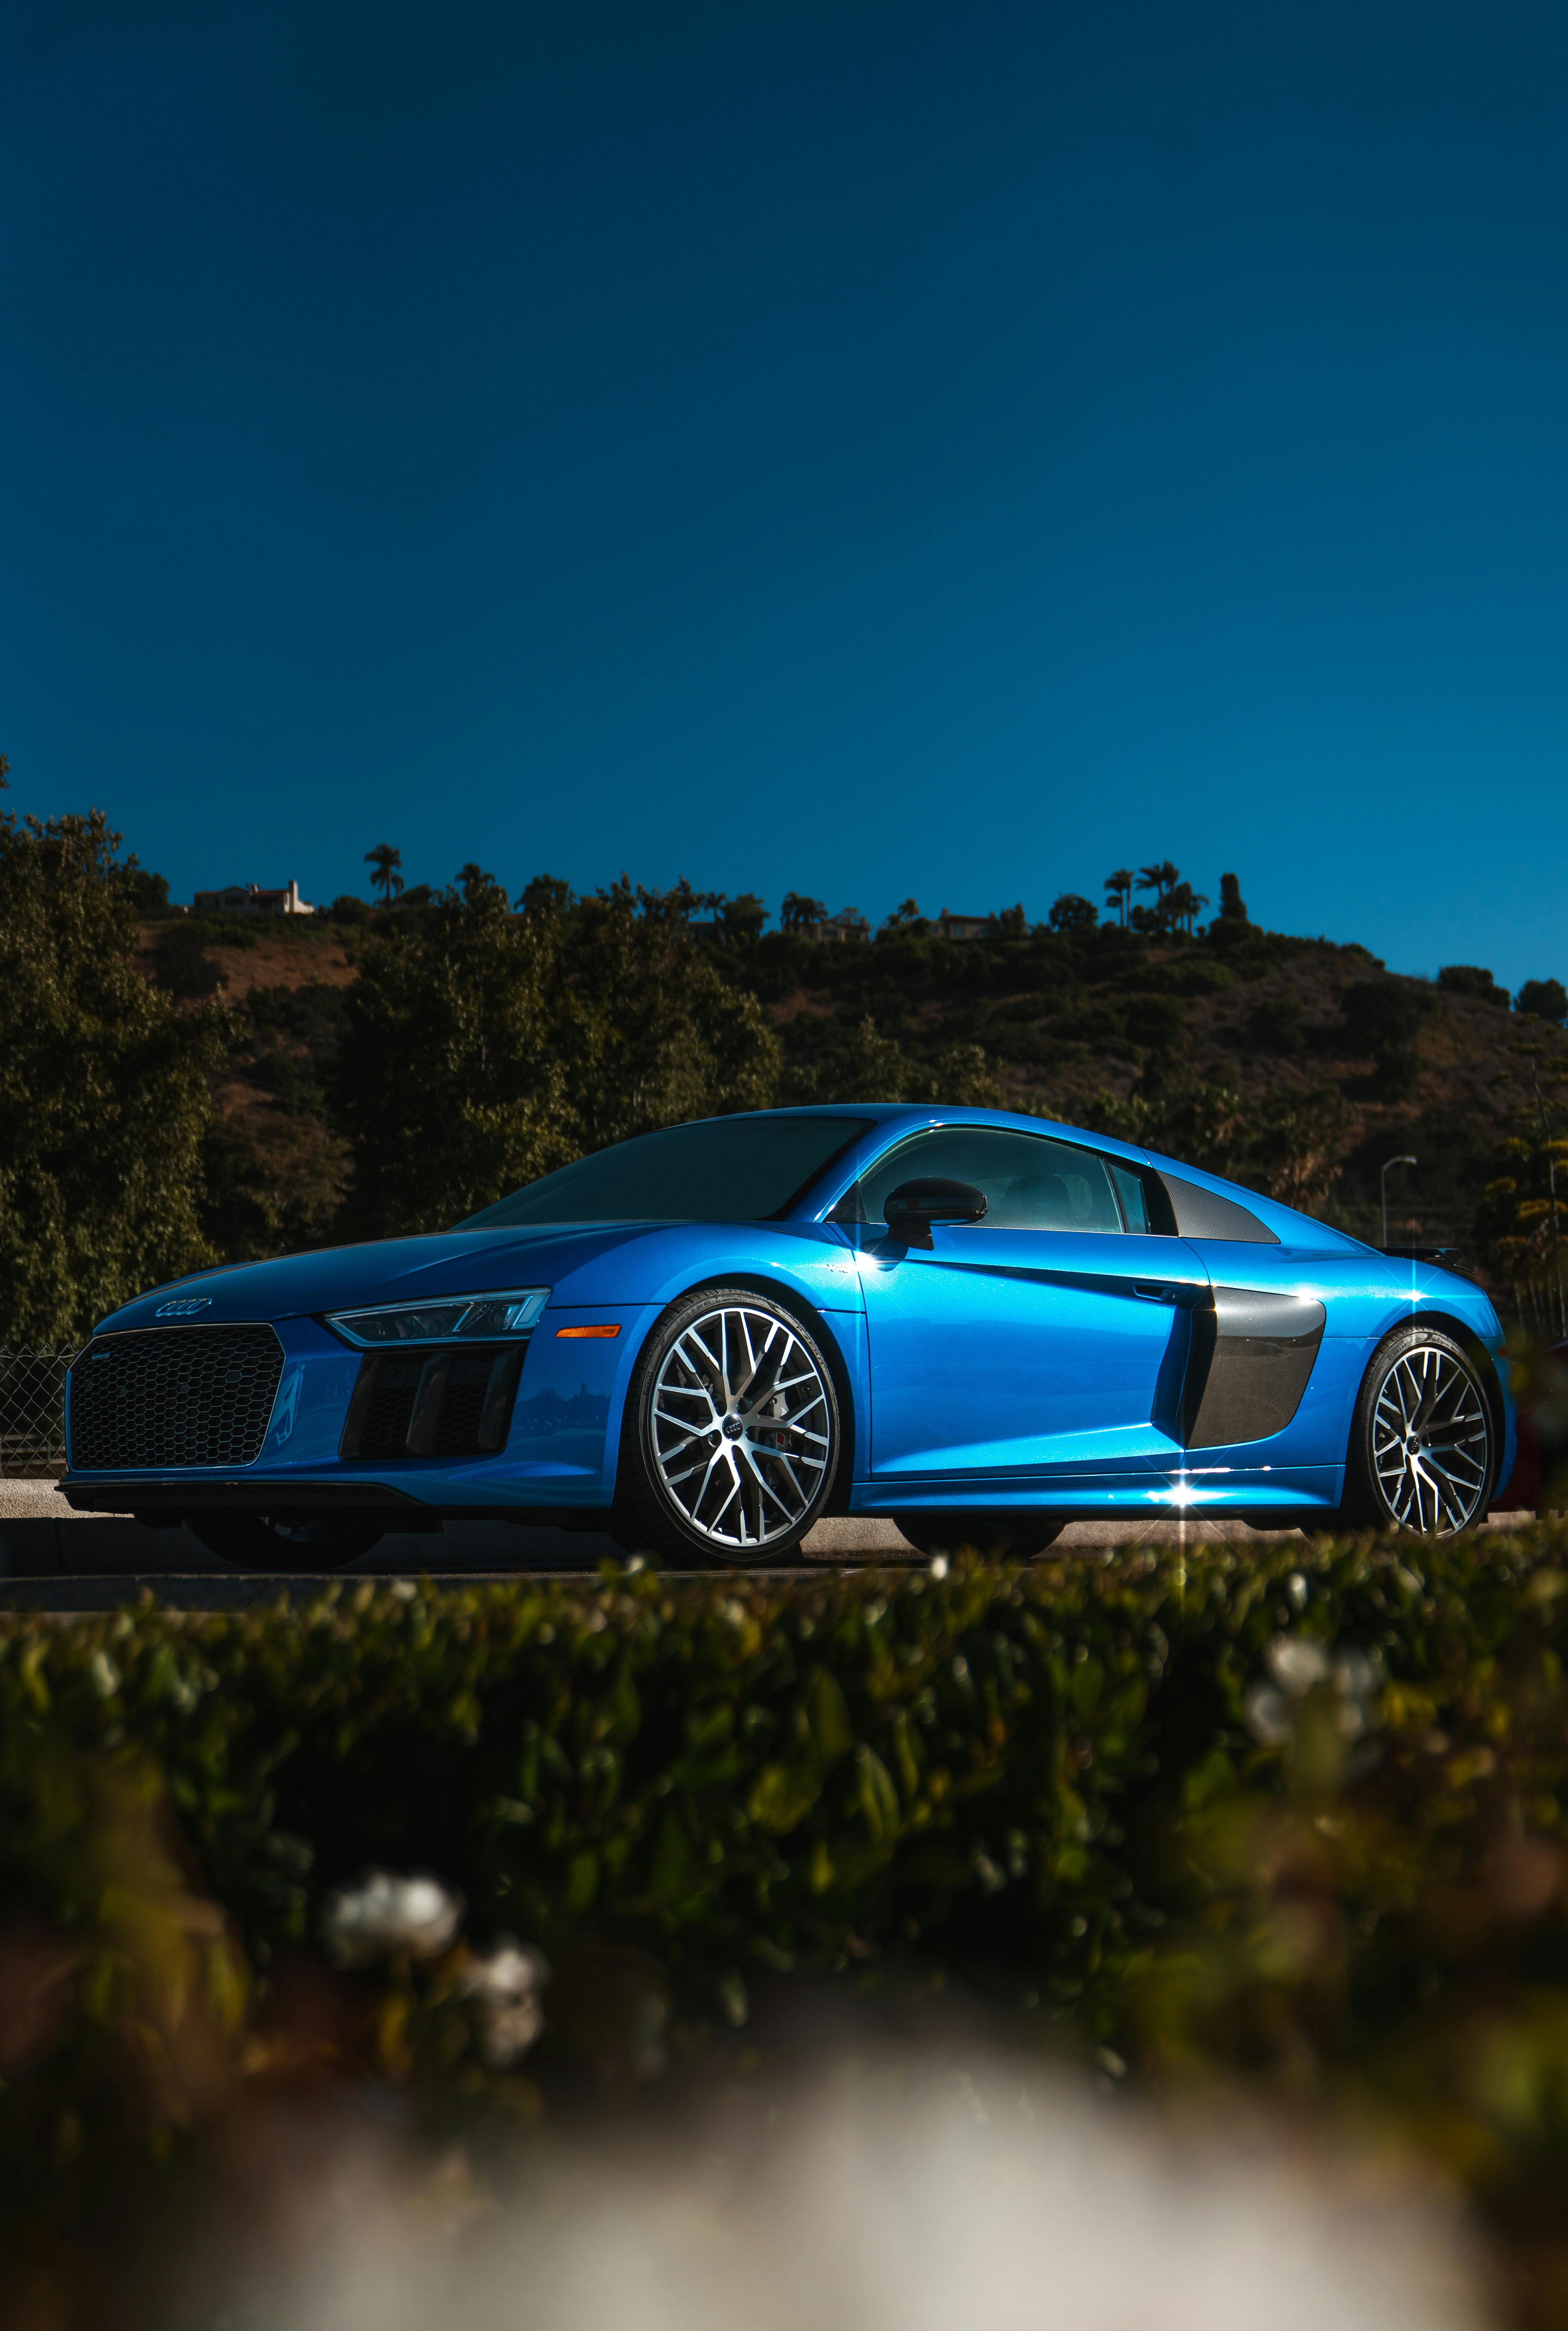 audi r8 1080P 2k 4k Full HD Wallpapers Backgrounds Free Download   Wallpaper Crafter